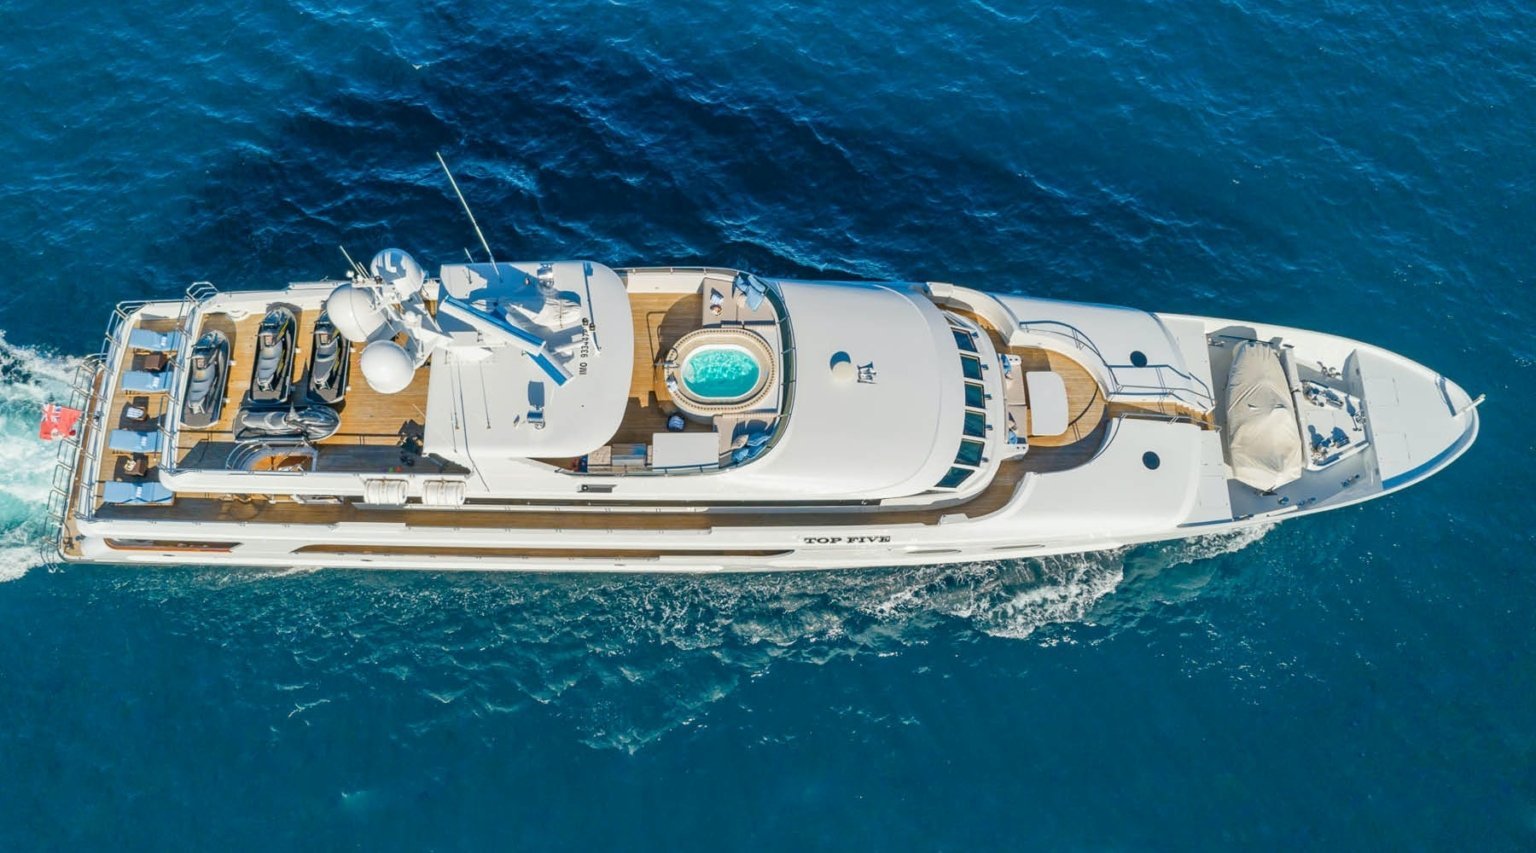 who owns yacht top five ii